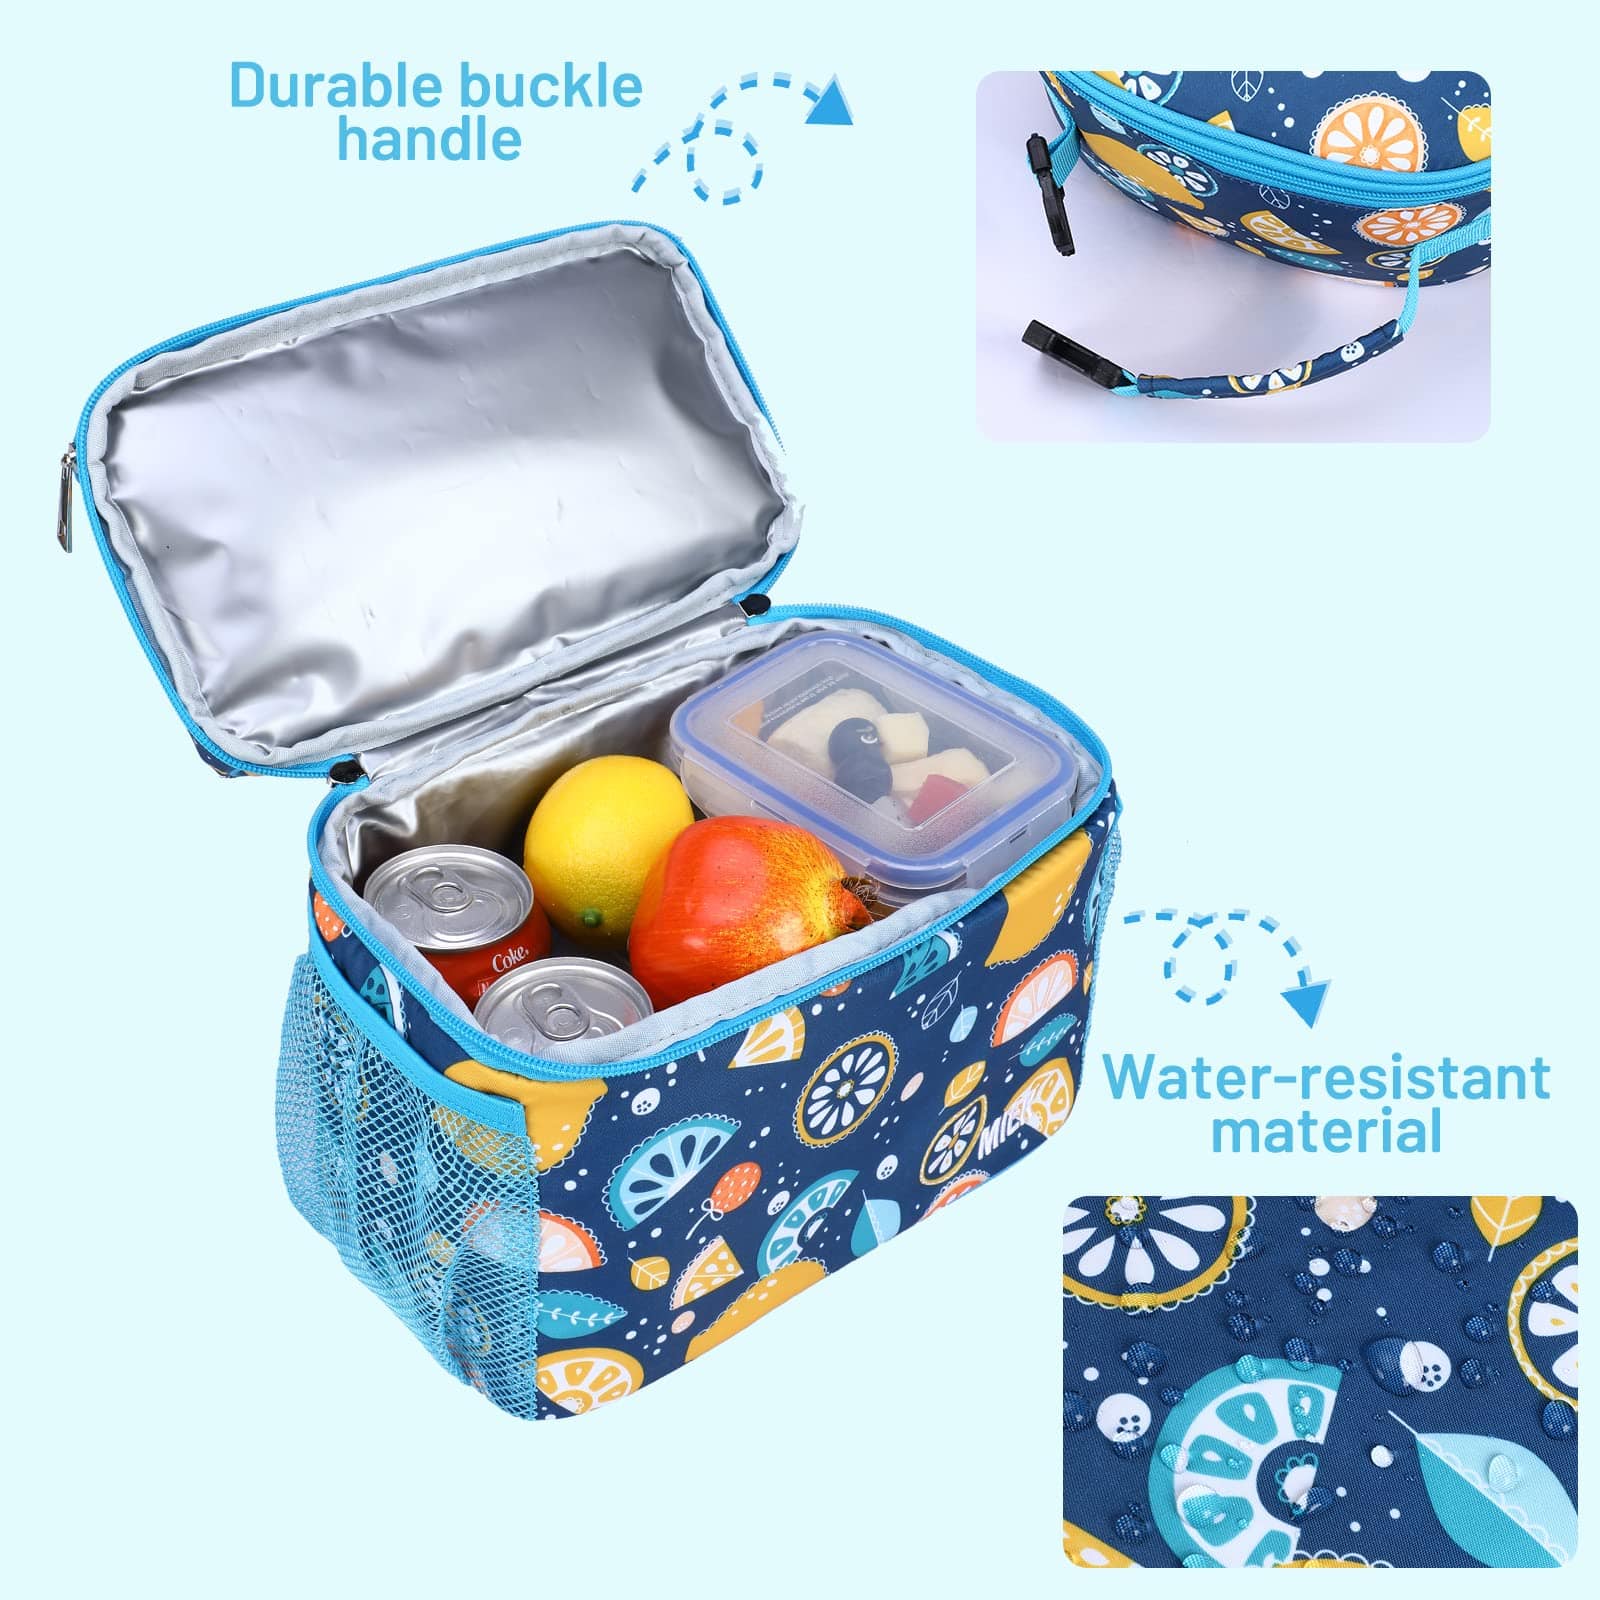  mibasies Kids Lunch Bag for Boys Toddler Insulated Lunch Box  for School Travel, Car: Home & Kitchen